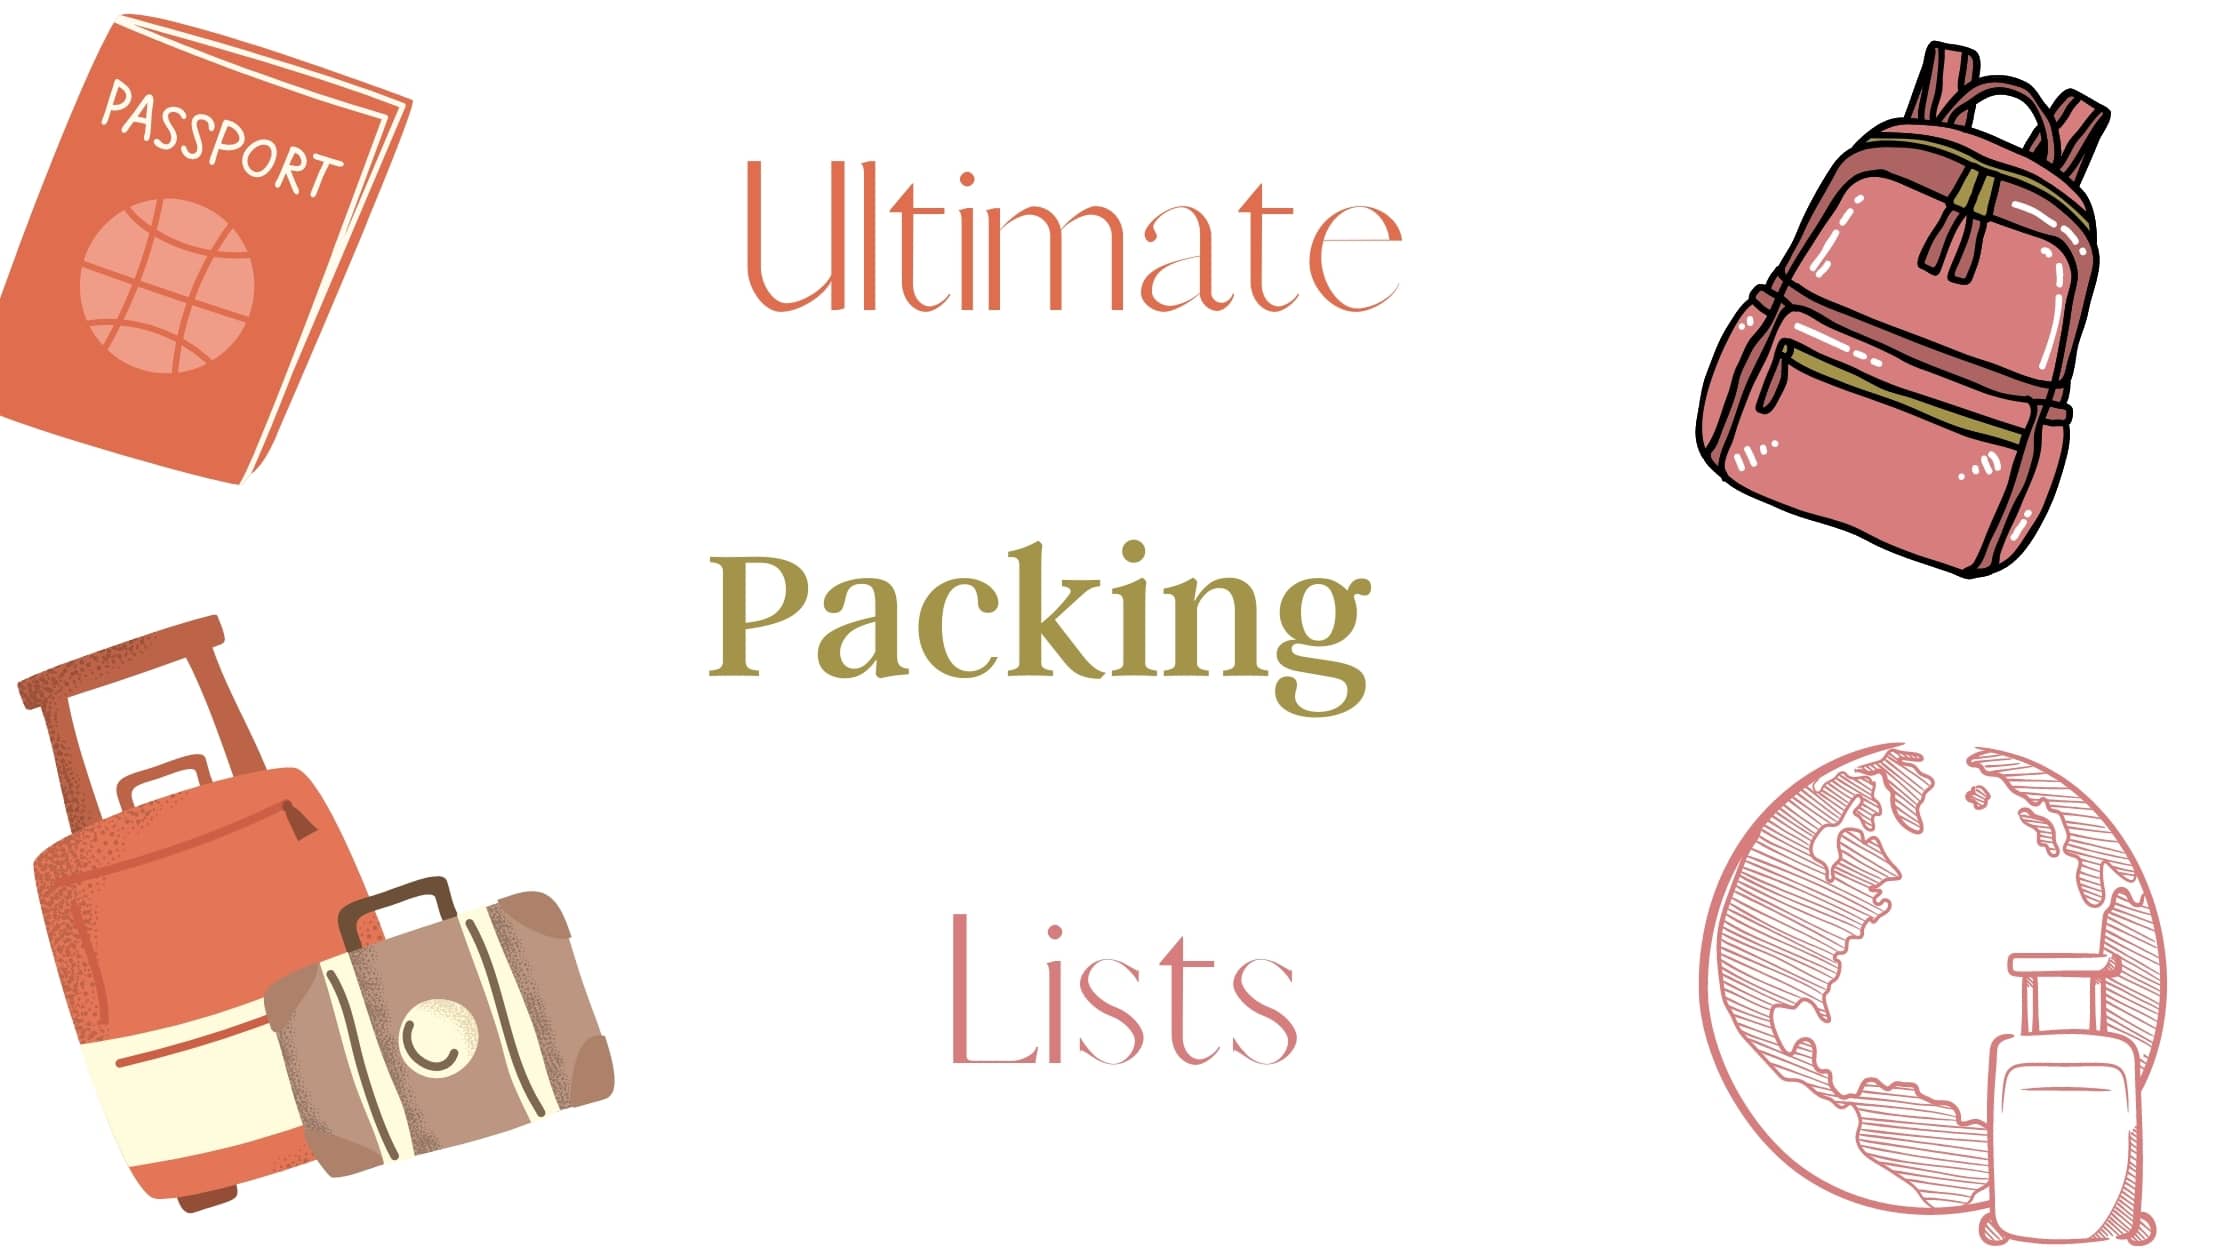 Ultimate Packing Lists